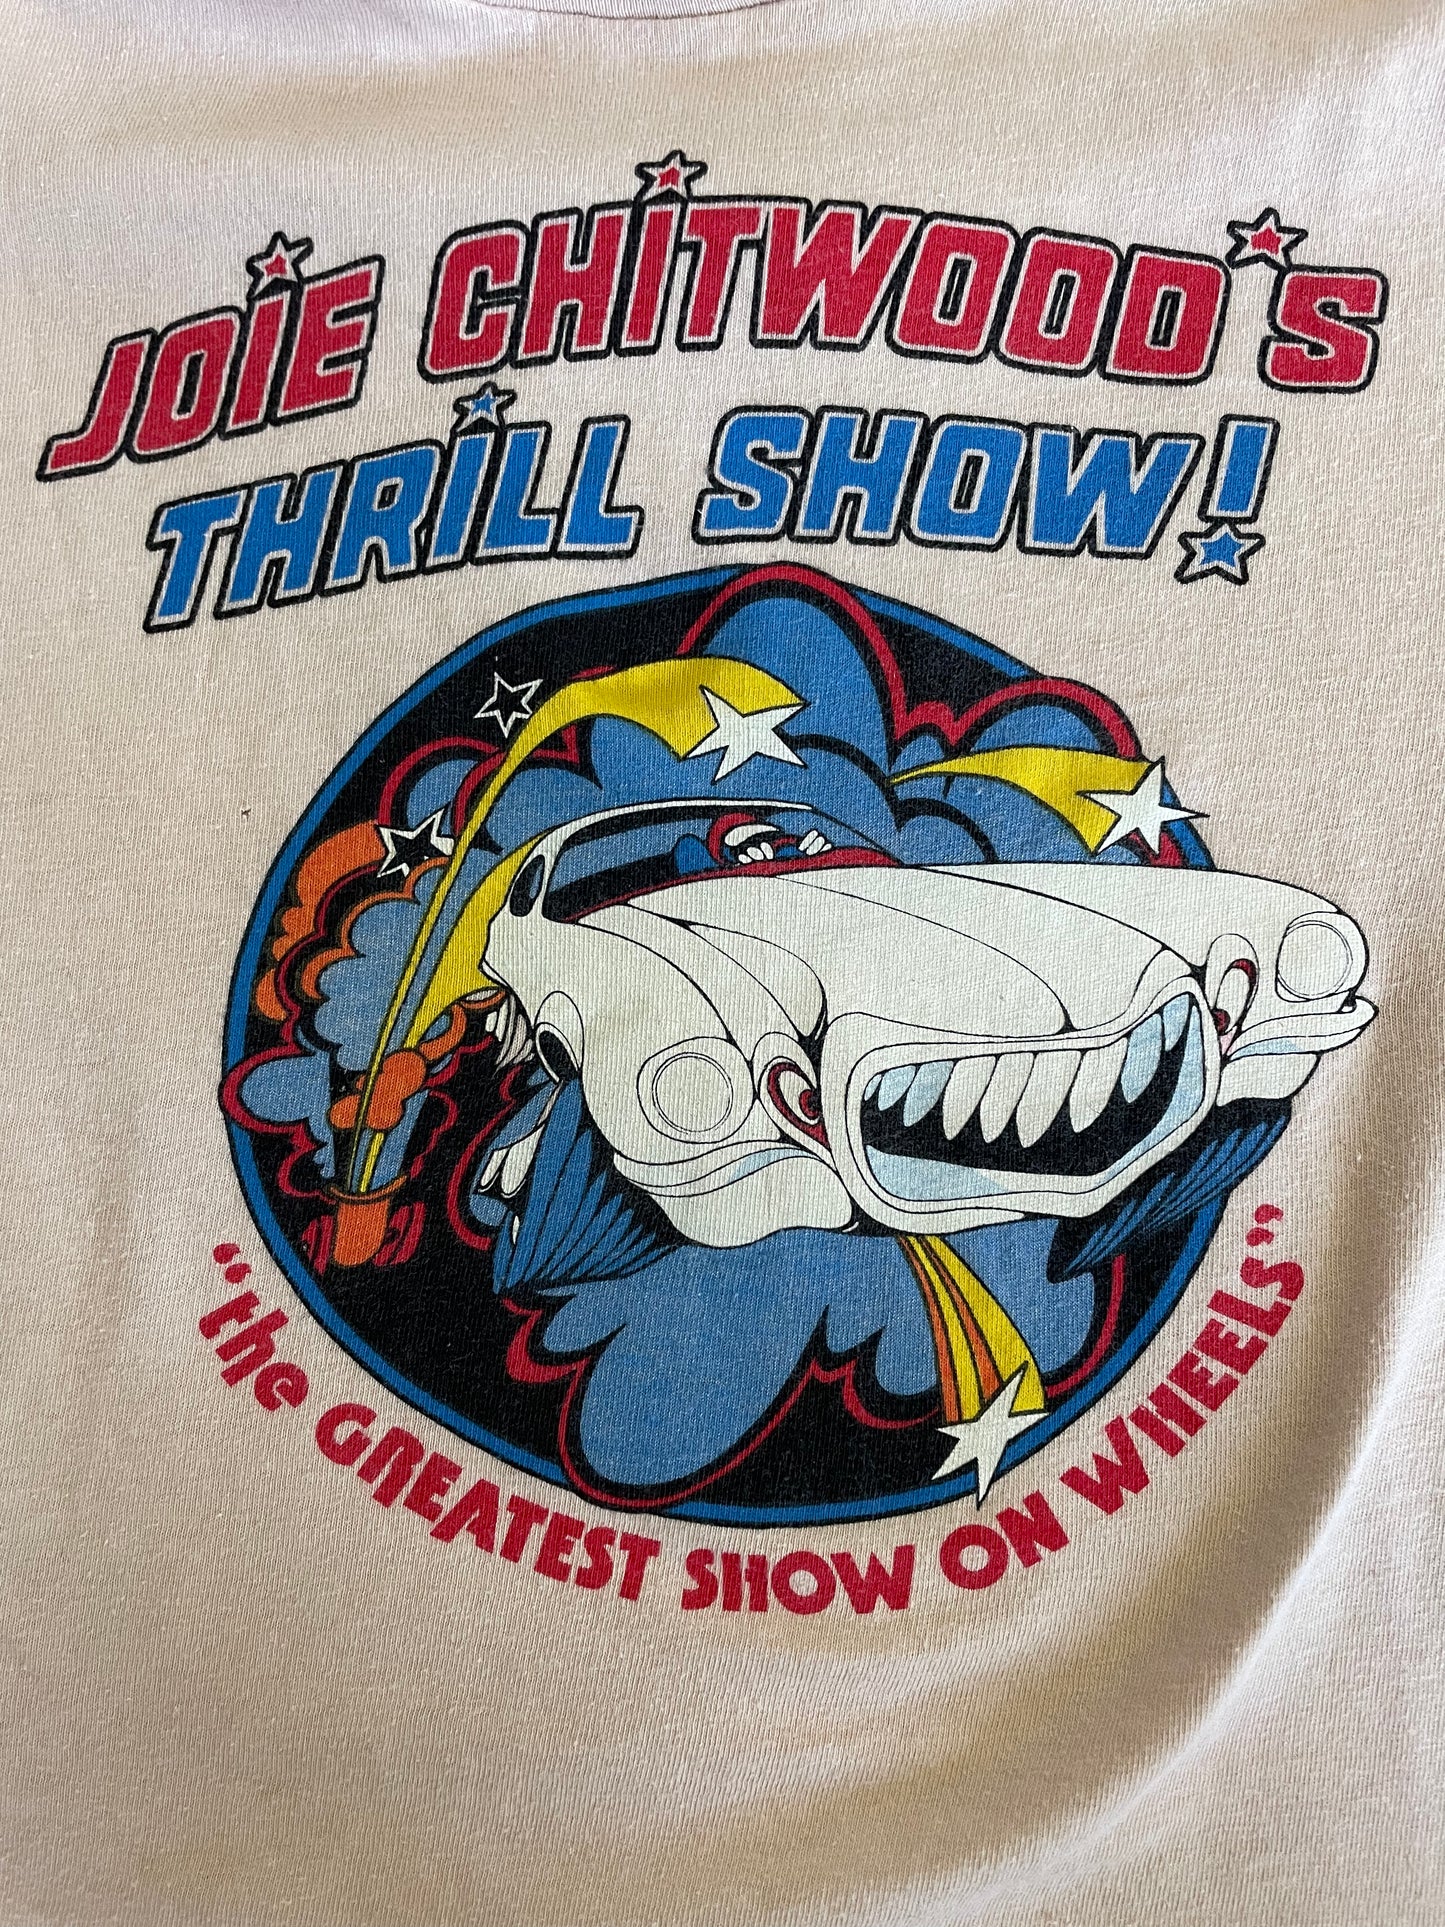 70s/80s Joie Chitwood’s Thrill Show Tee